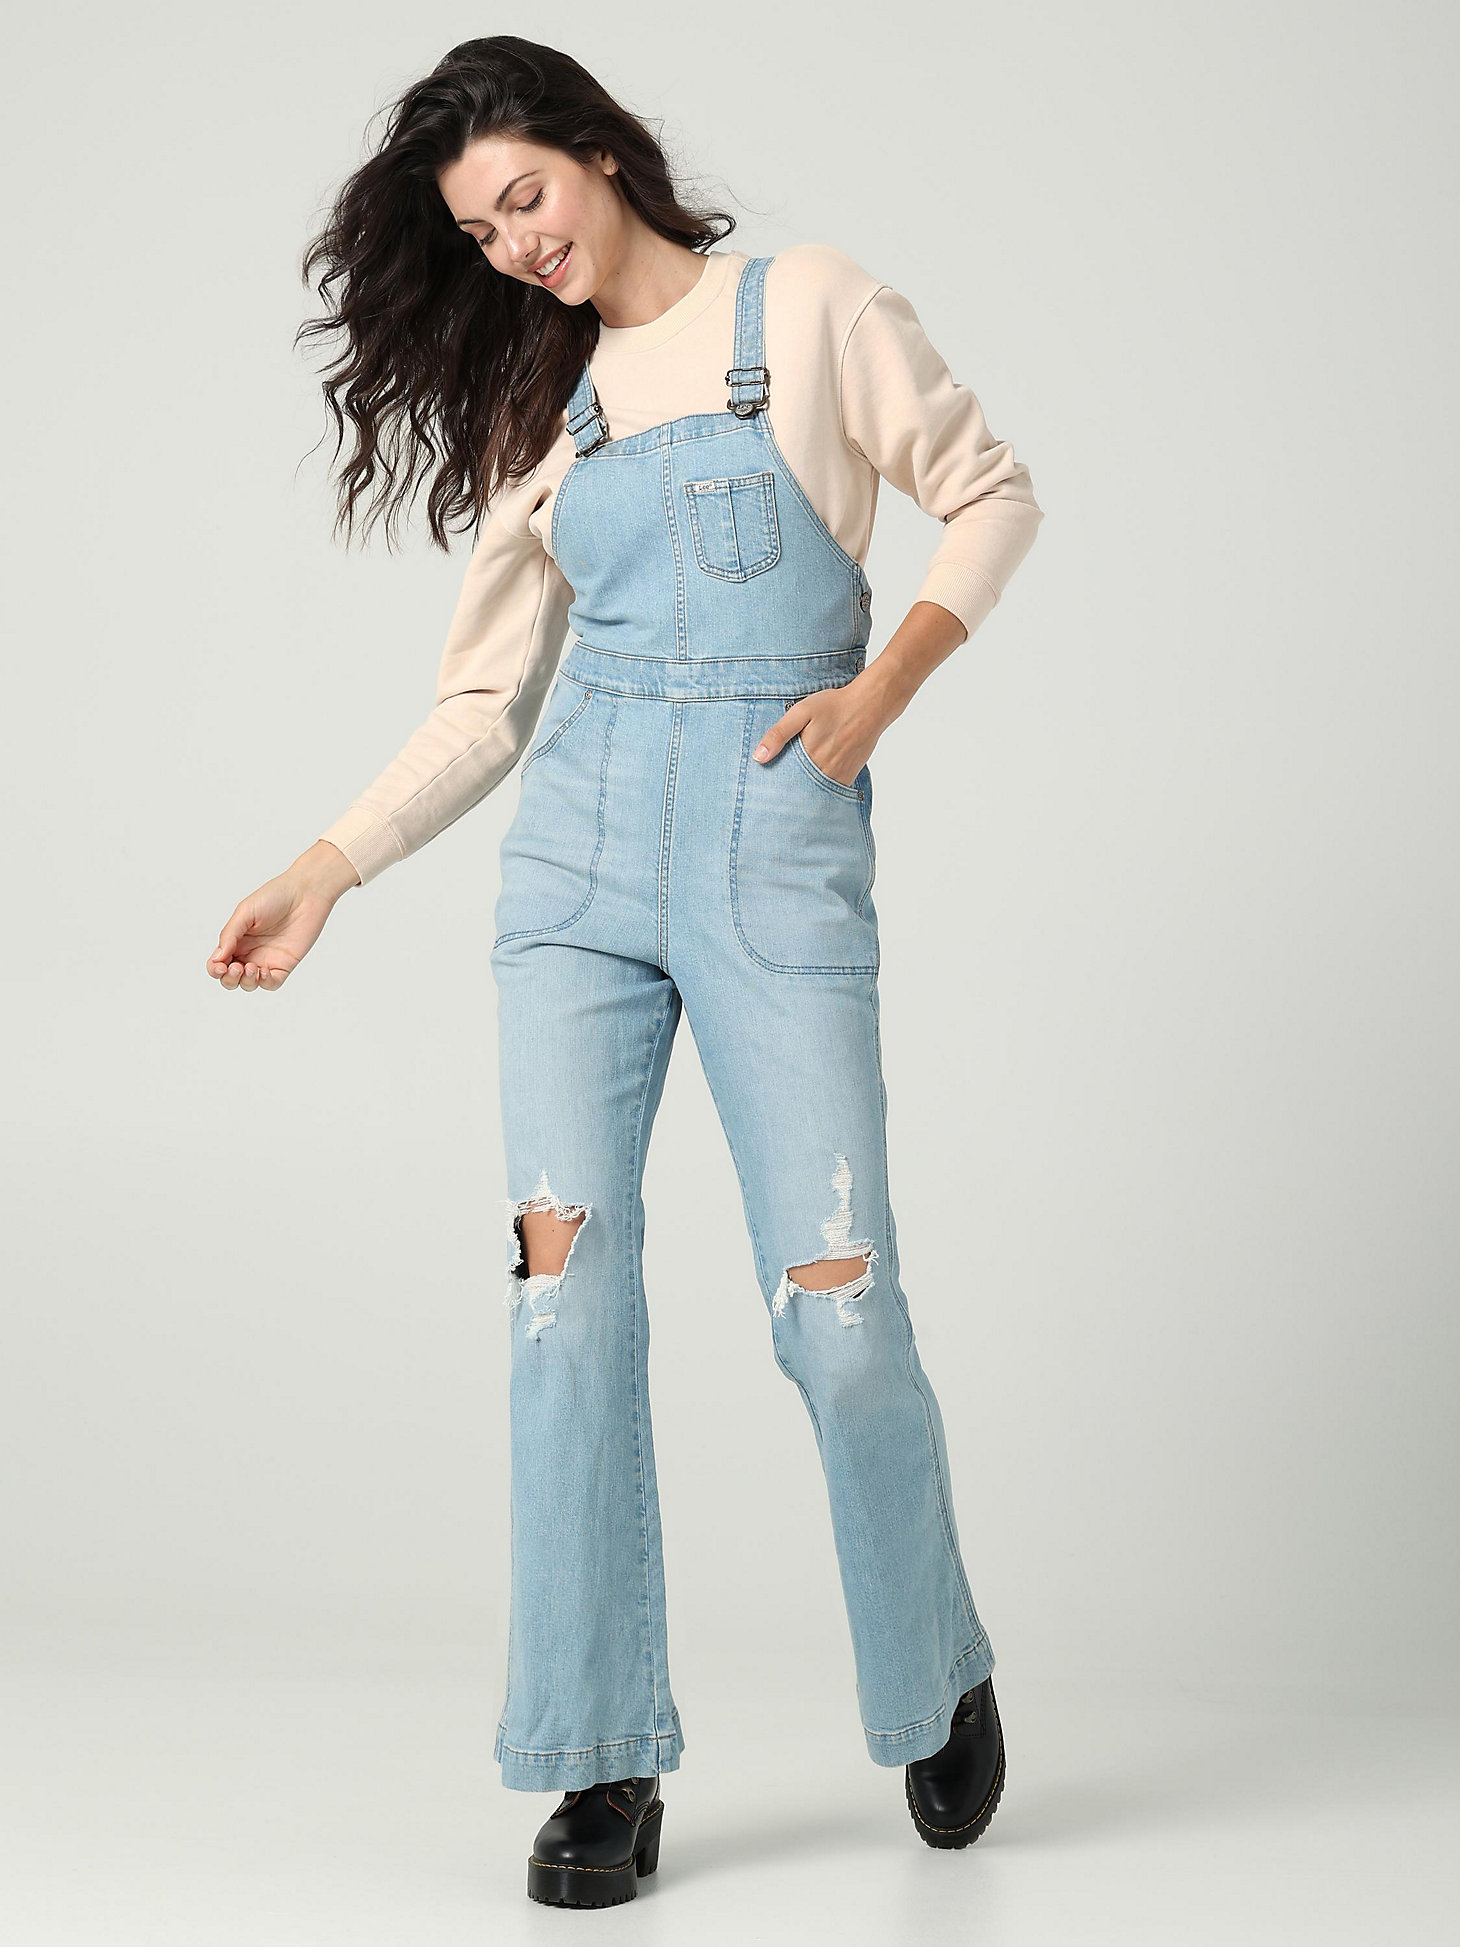 Women's Lee European Collection Factory Flare Overall in Sunbleach main view